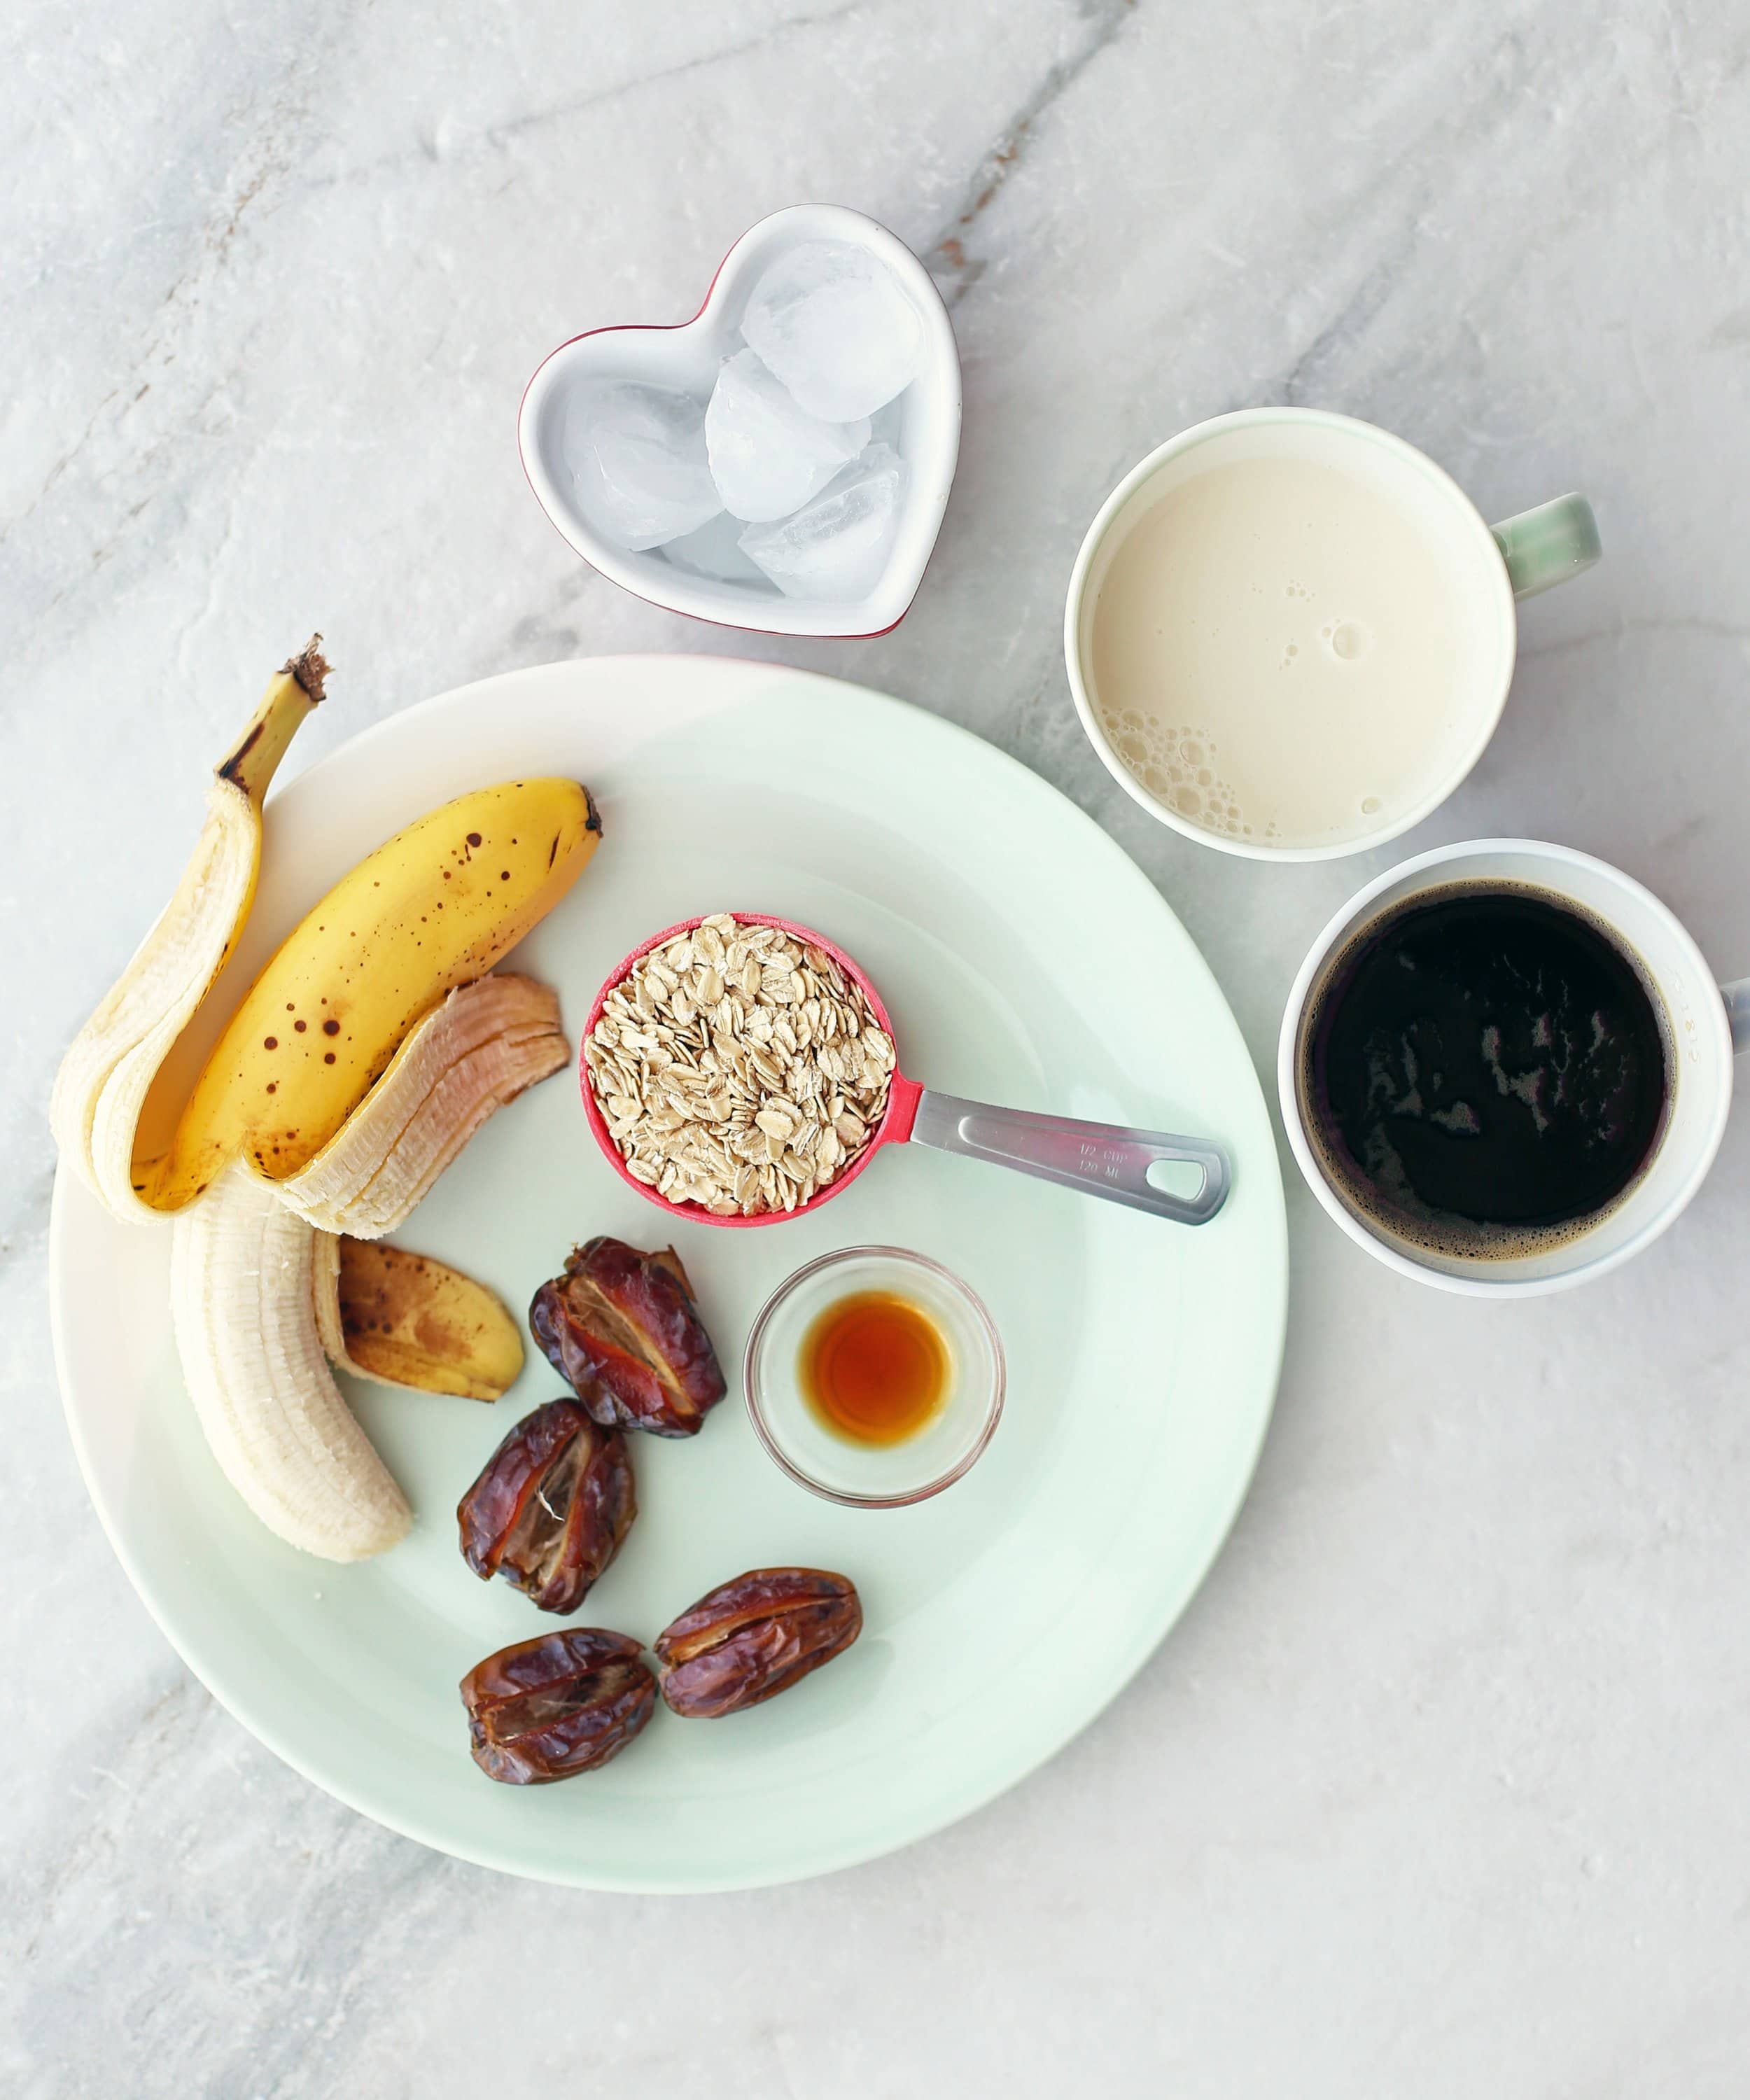 Medjool dates, a banana, rolled oats, vanilla extract, milk, coffee, and ice in bowls and on a plate.